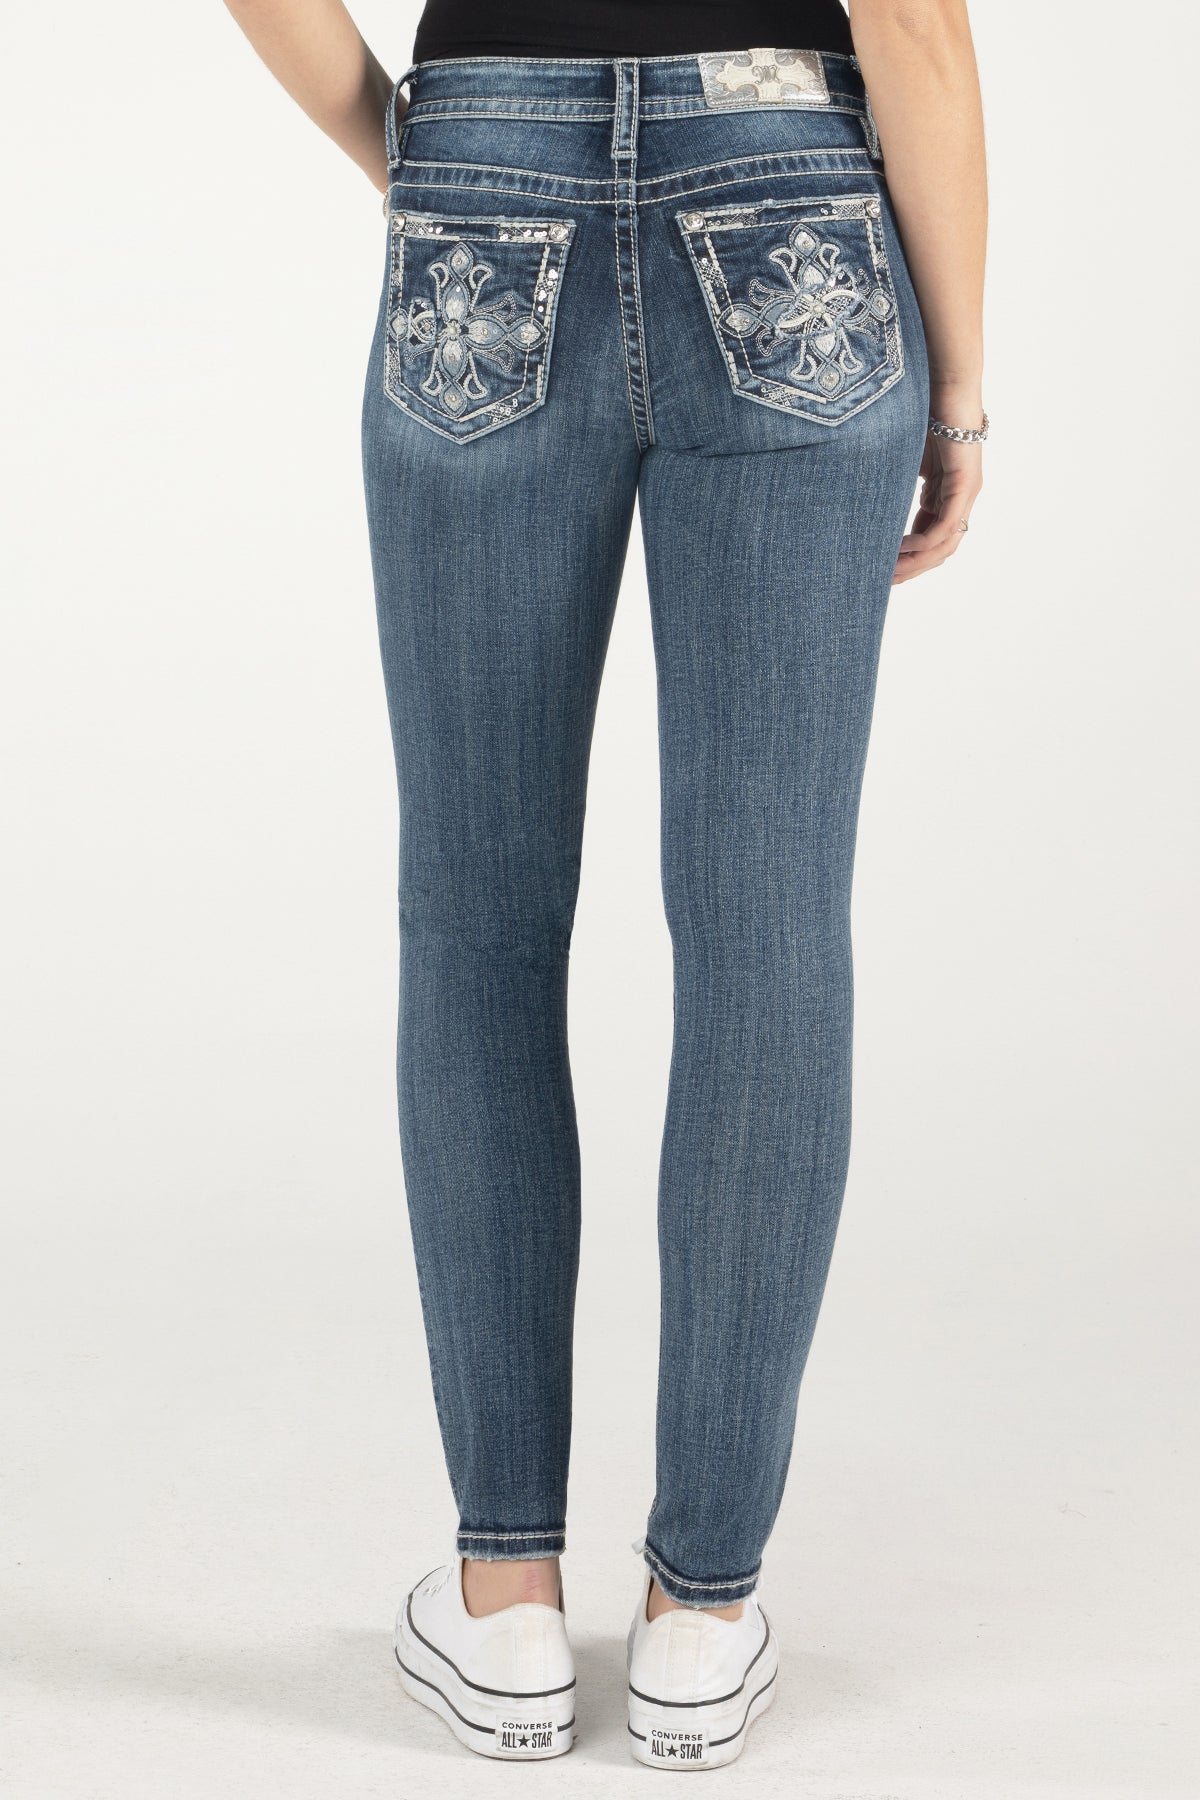 Uncovered Gem Skinny Jeans, Only $119.00